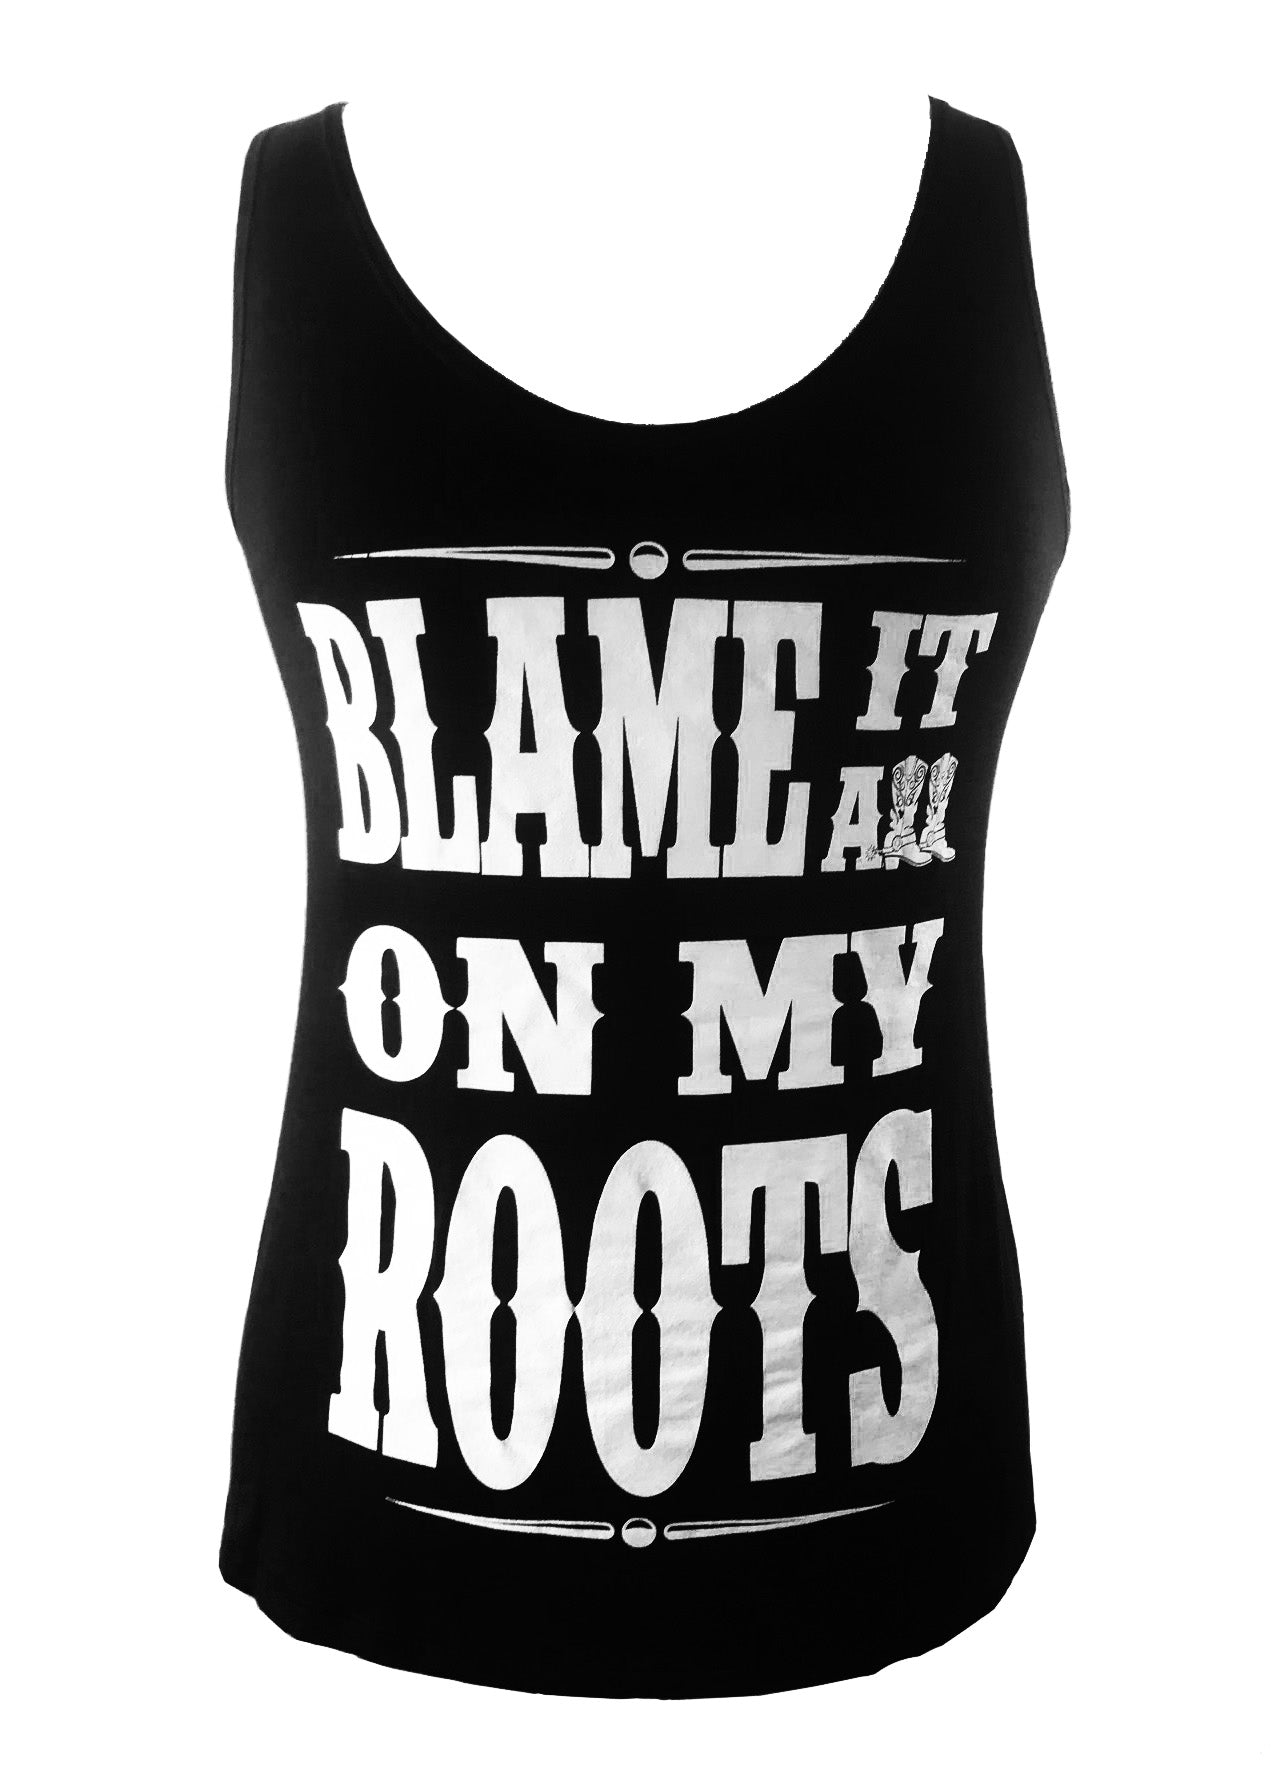 BLAME IT ON MY ROOTS TANK TOP - Trailsclothing.com